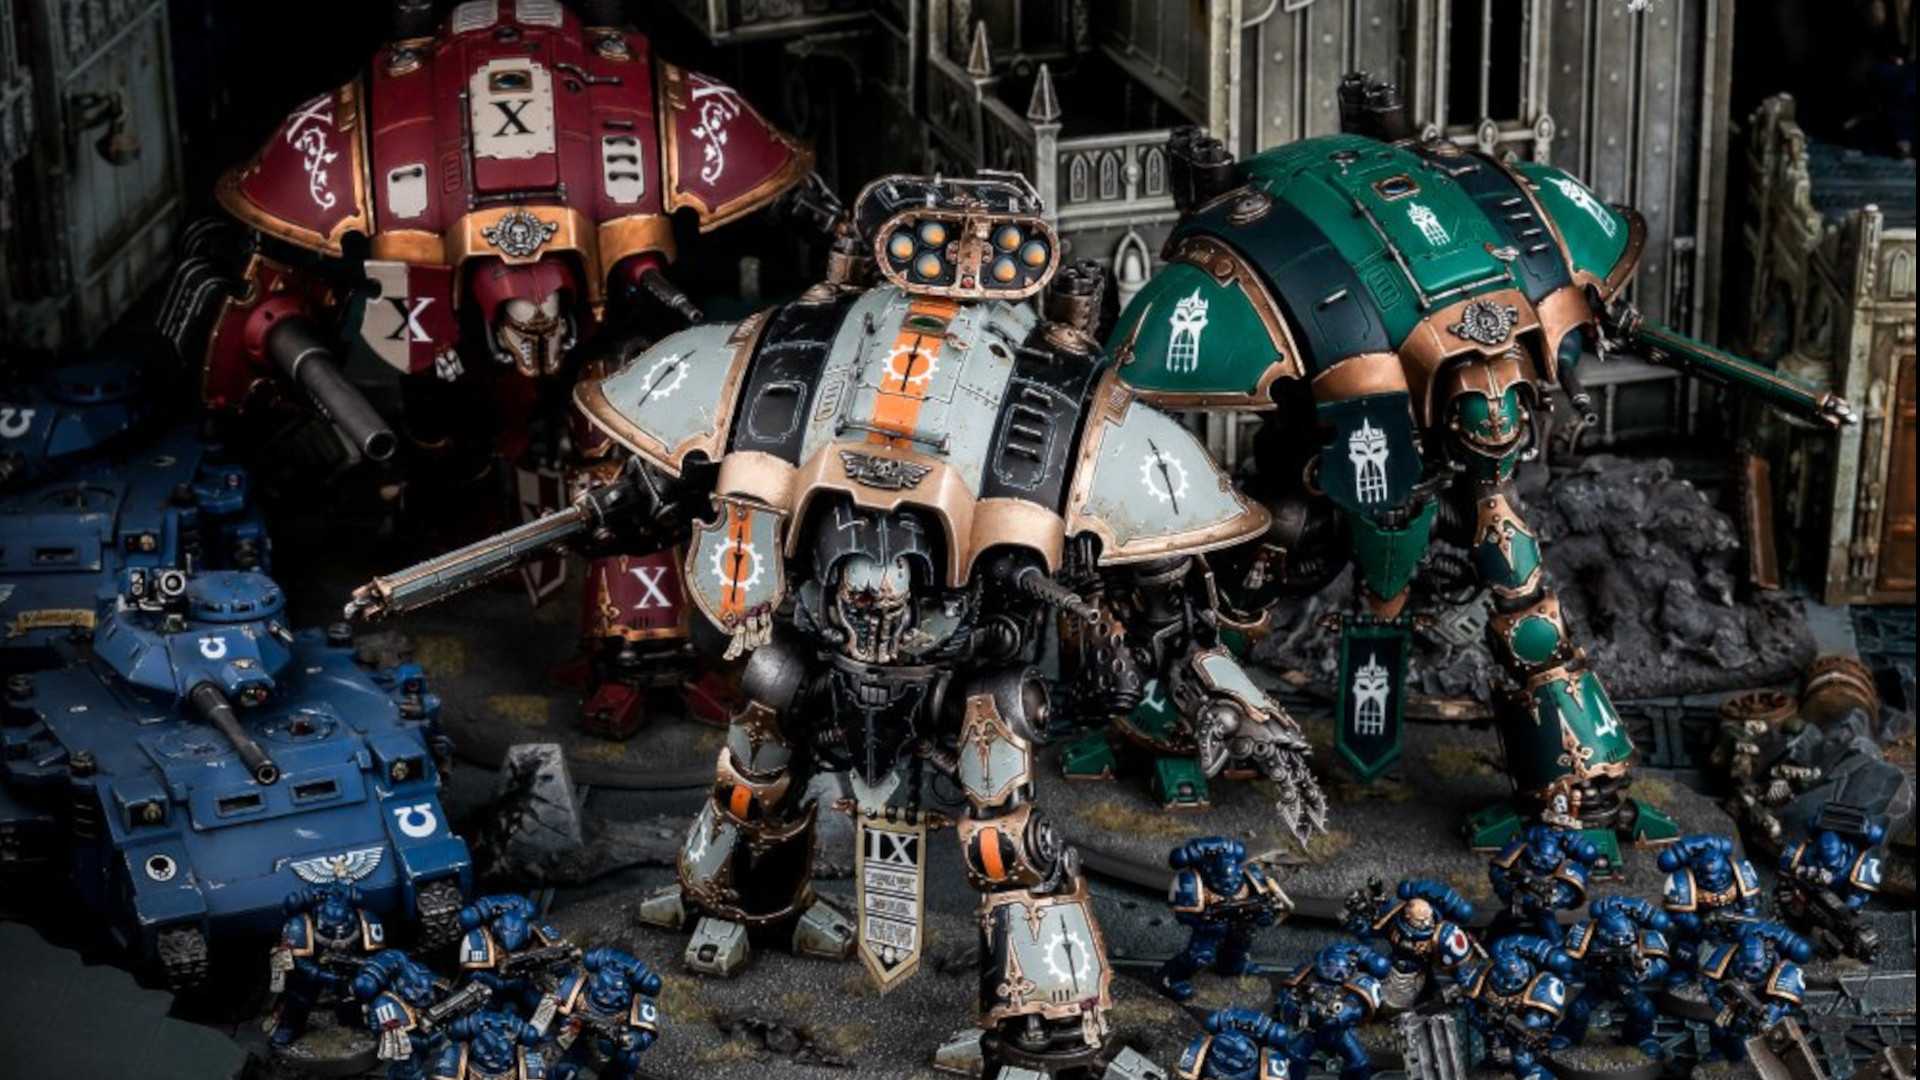 Warhammer 40k Imperial Knights army guide - Games Workshop photo of multiple Freeblade Imperial Knights models